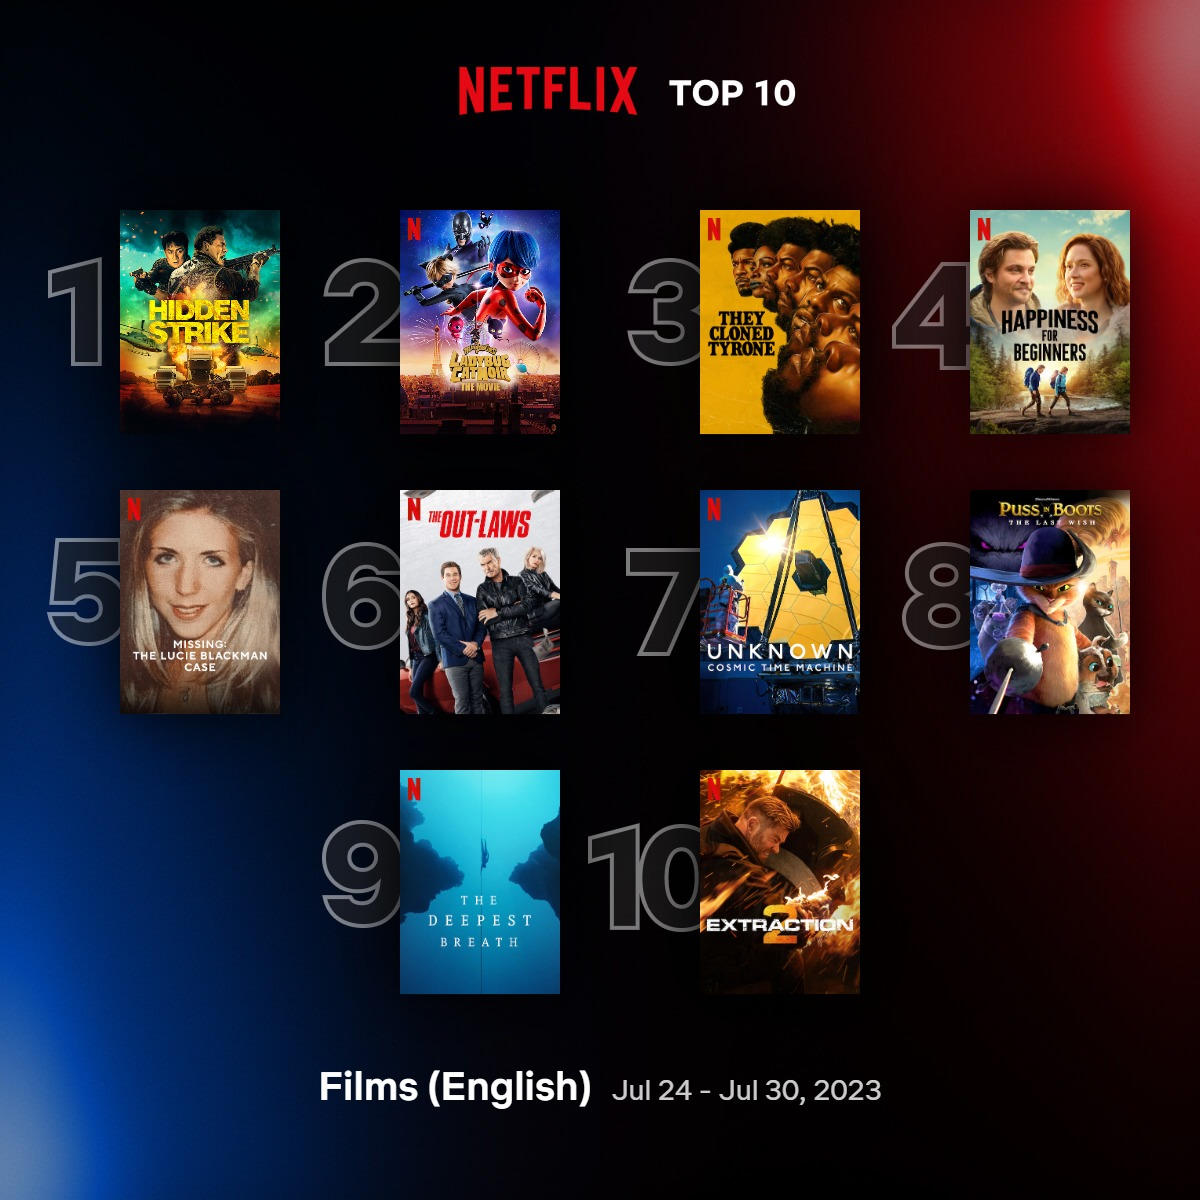 Anime Takes Four Top Places in Netflix Weekly Chart